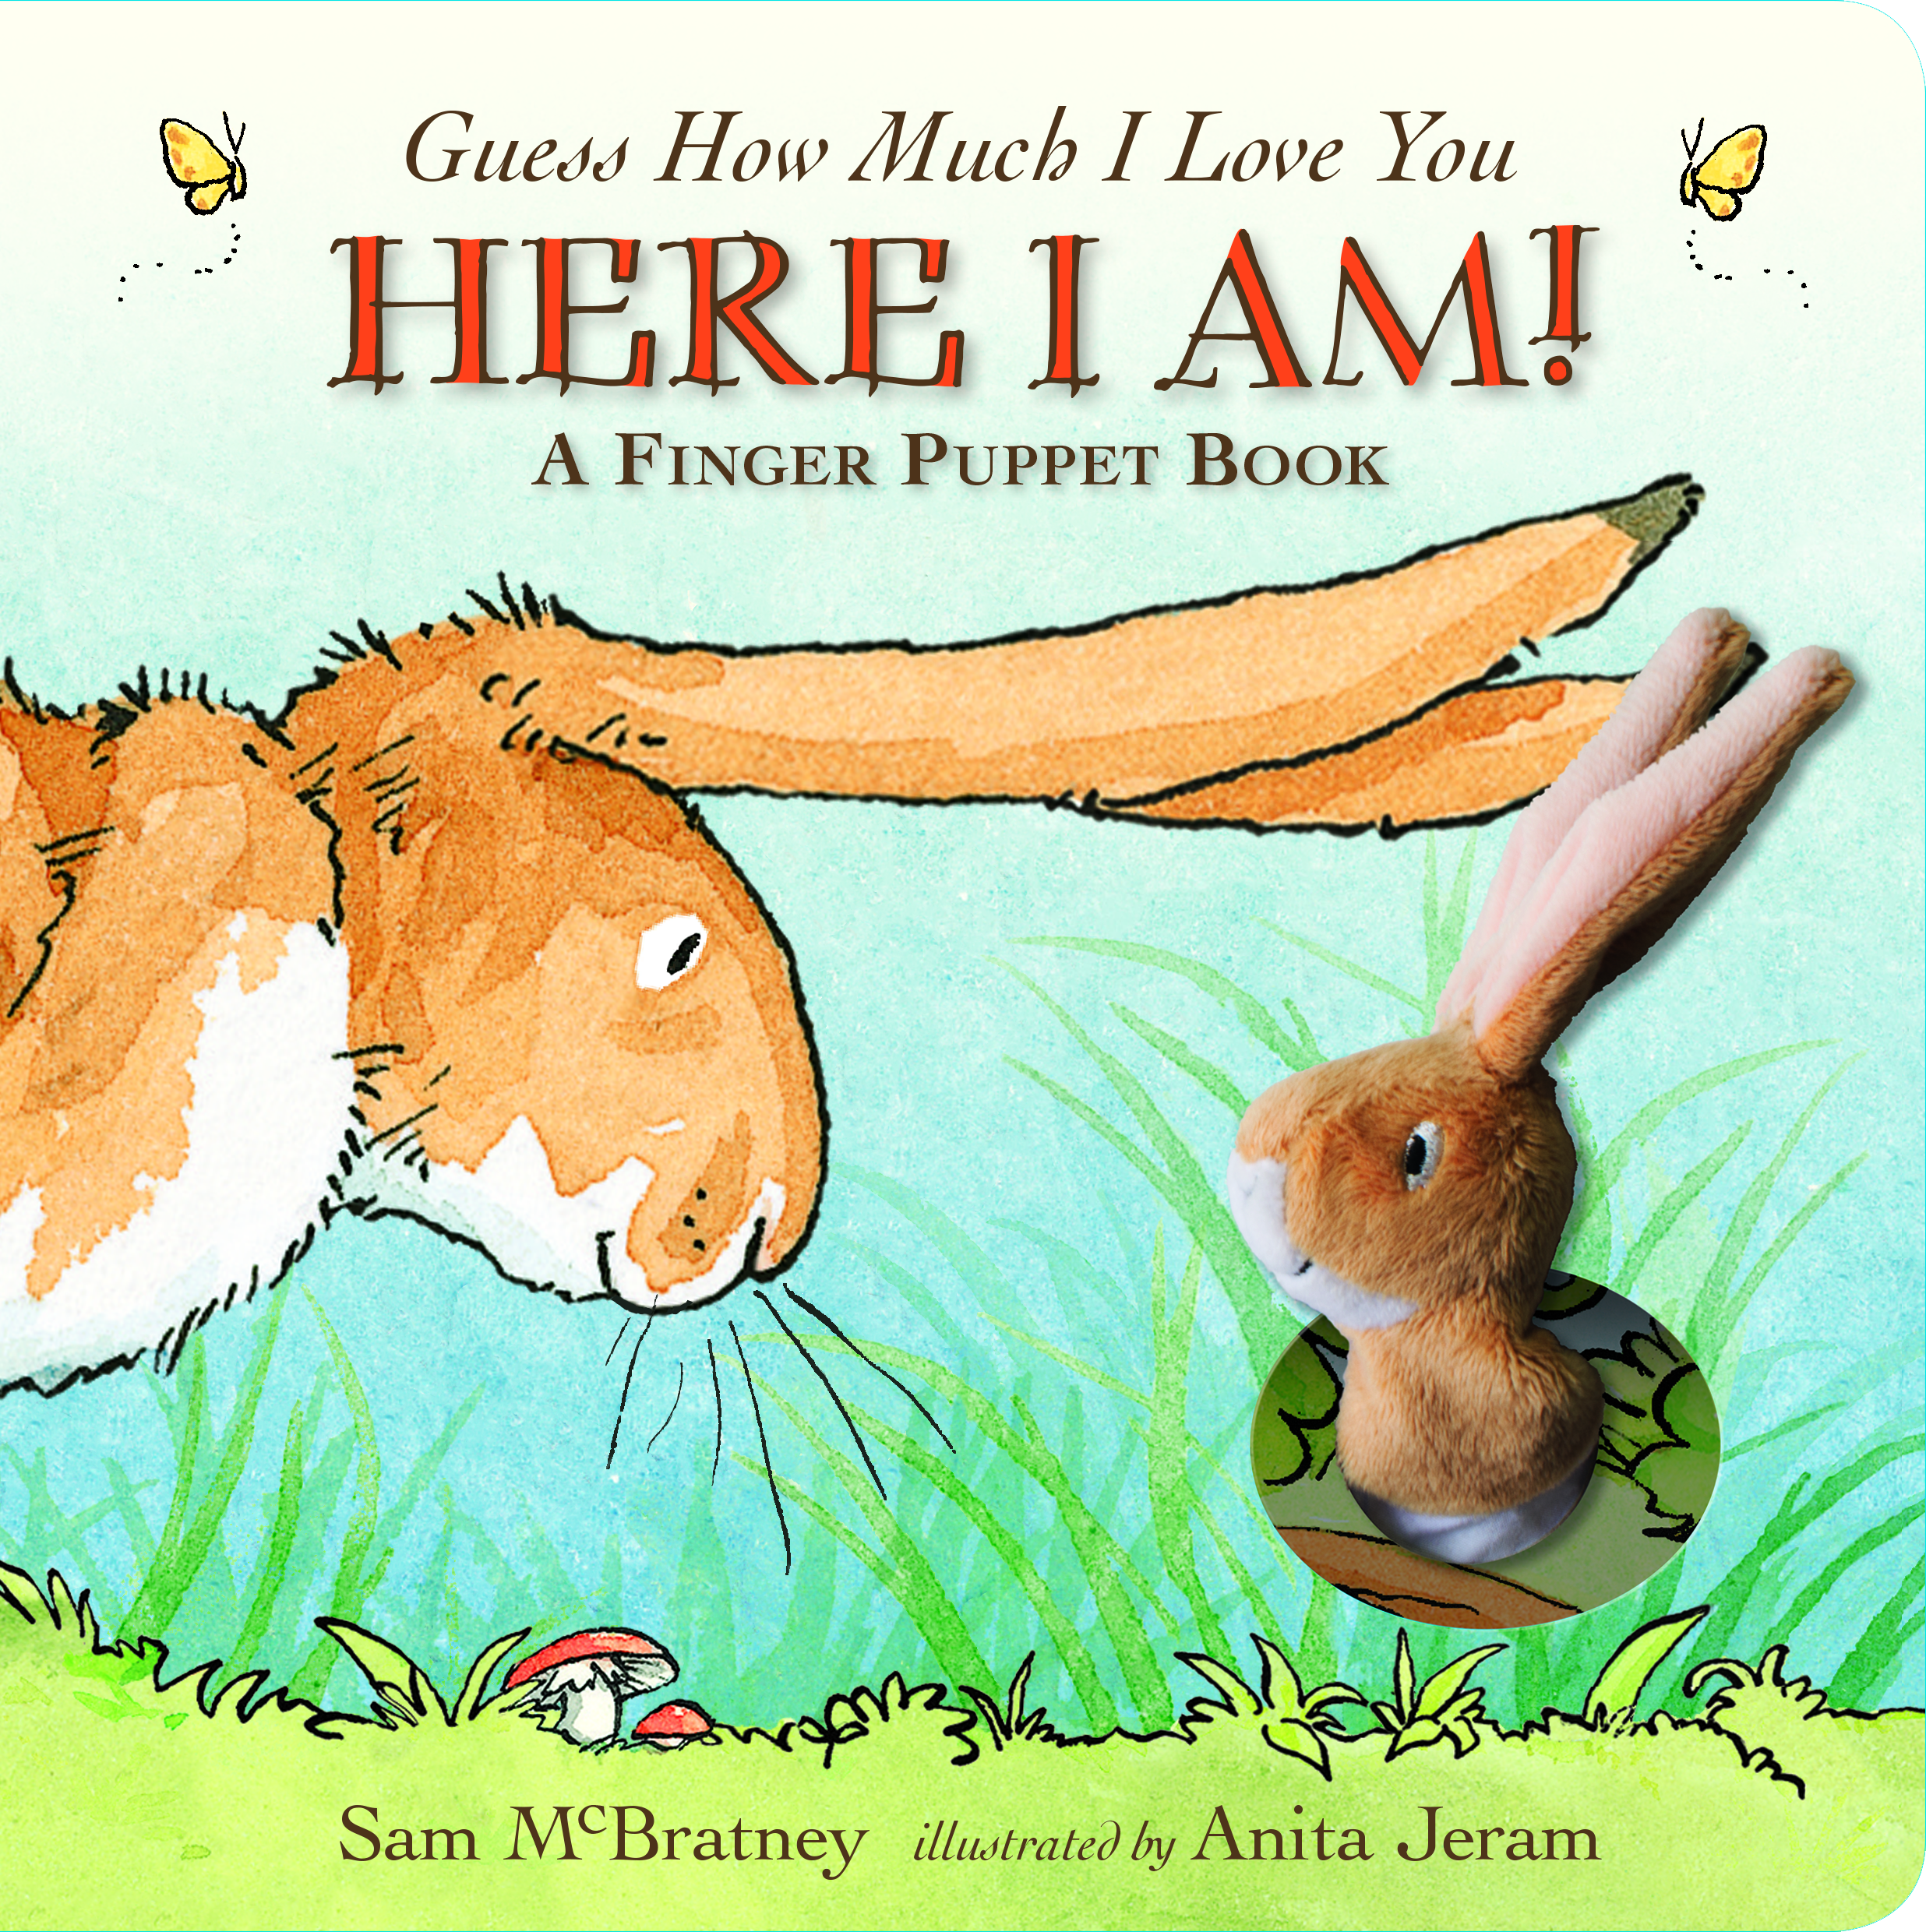 Guess-How-Much-I-Love-You-Here-I-Am-A-Finger-Puppet-Book